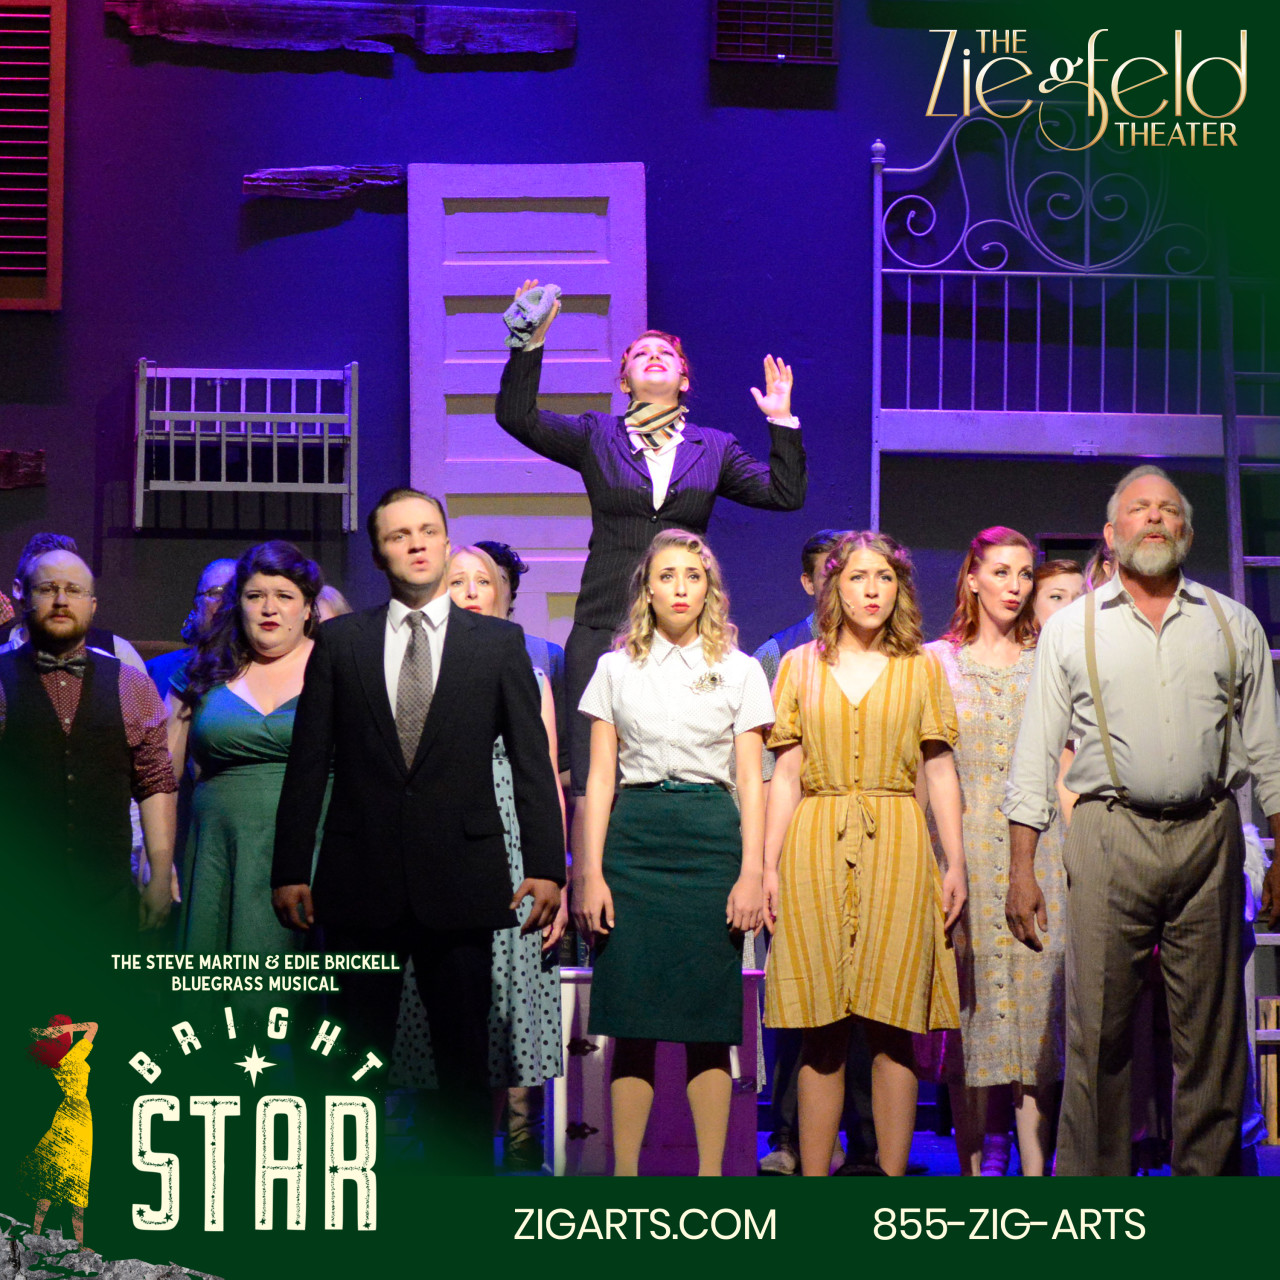 The Ziegfeld Theater on Twitter: "This beautiful show, as all have to, will  be gone forever Saturday night. Two chances left to see "Bright Star"  Friday and Saturday at 7:30 PM. Tickets are going fast.  https://t.co/p51h8rkwNq… https://t.co/hMUKs6Hdaf"